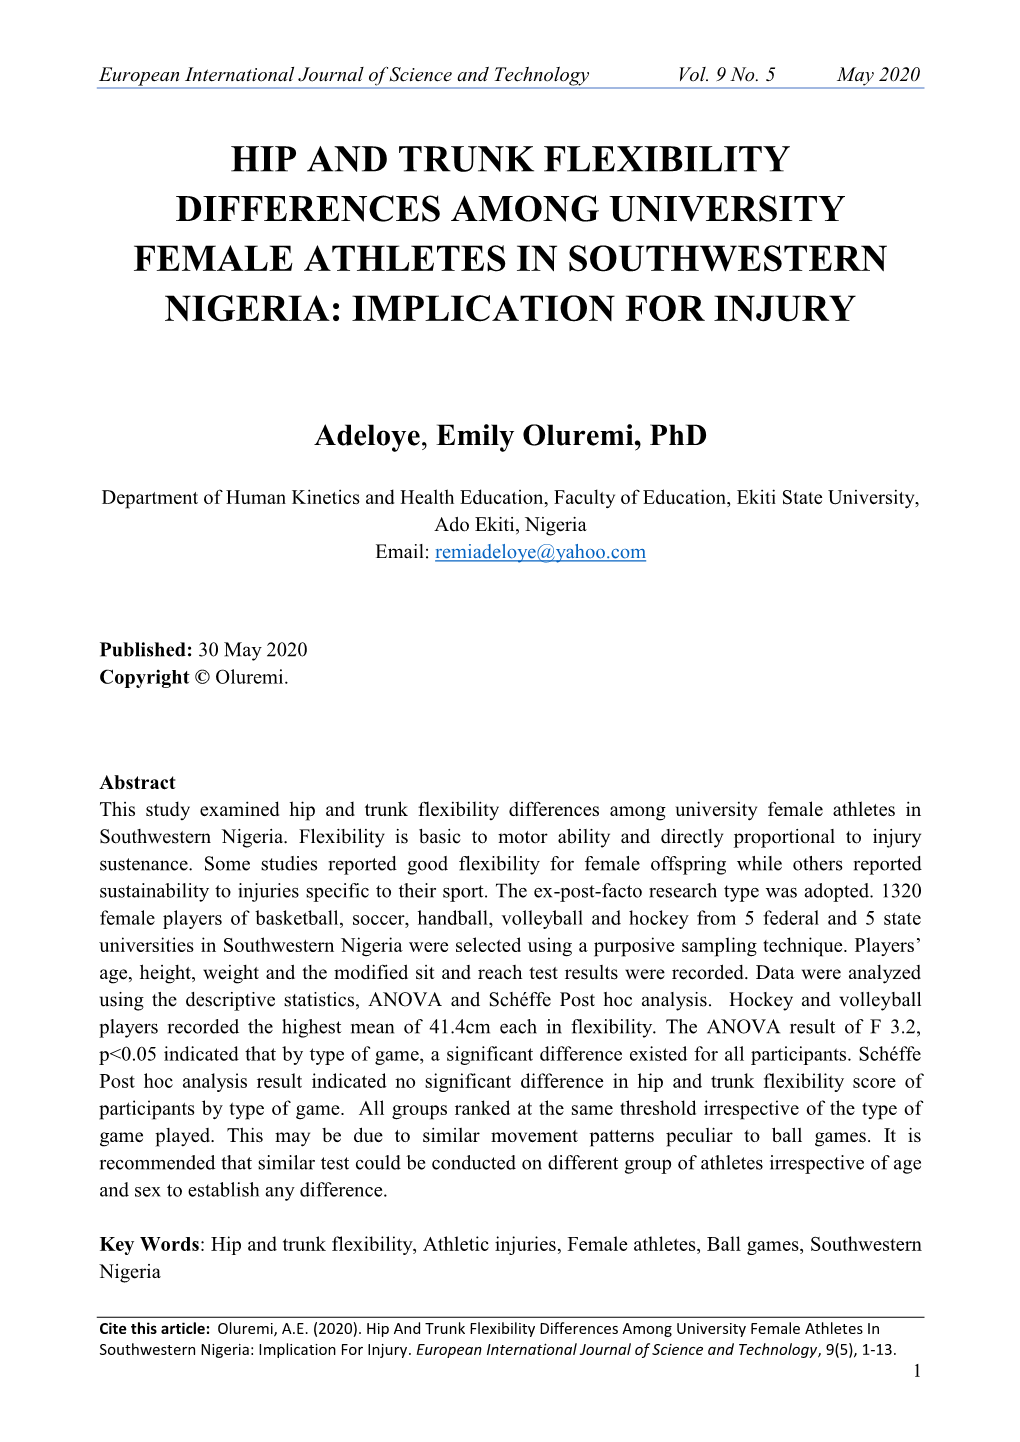 Hip and Trunk Flexibility Differences Among University Female Athletes in Southwestern Nigeria: Implication for Injury